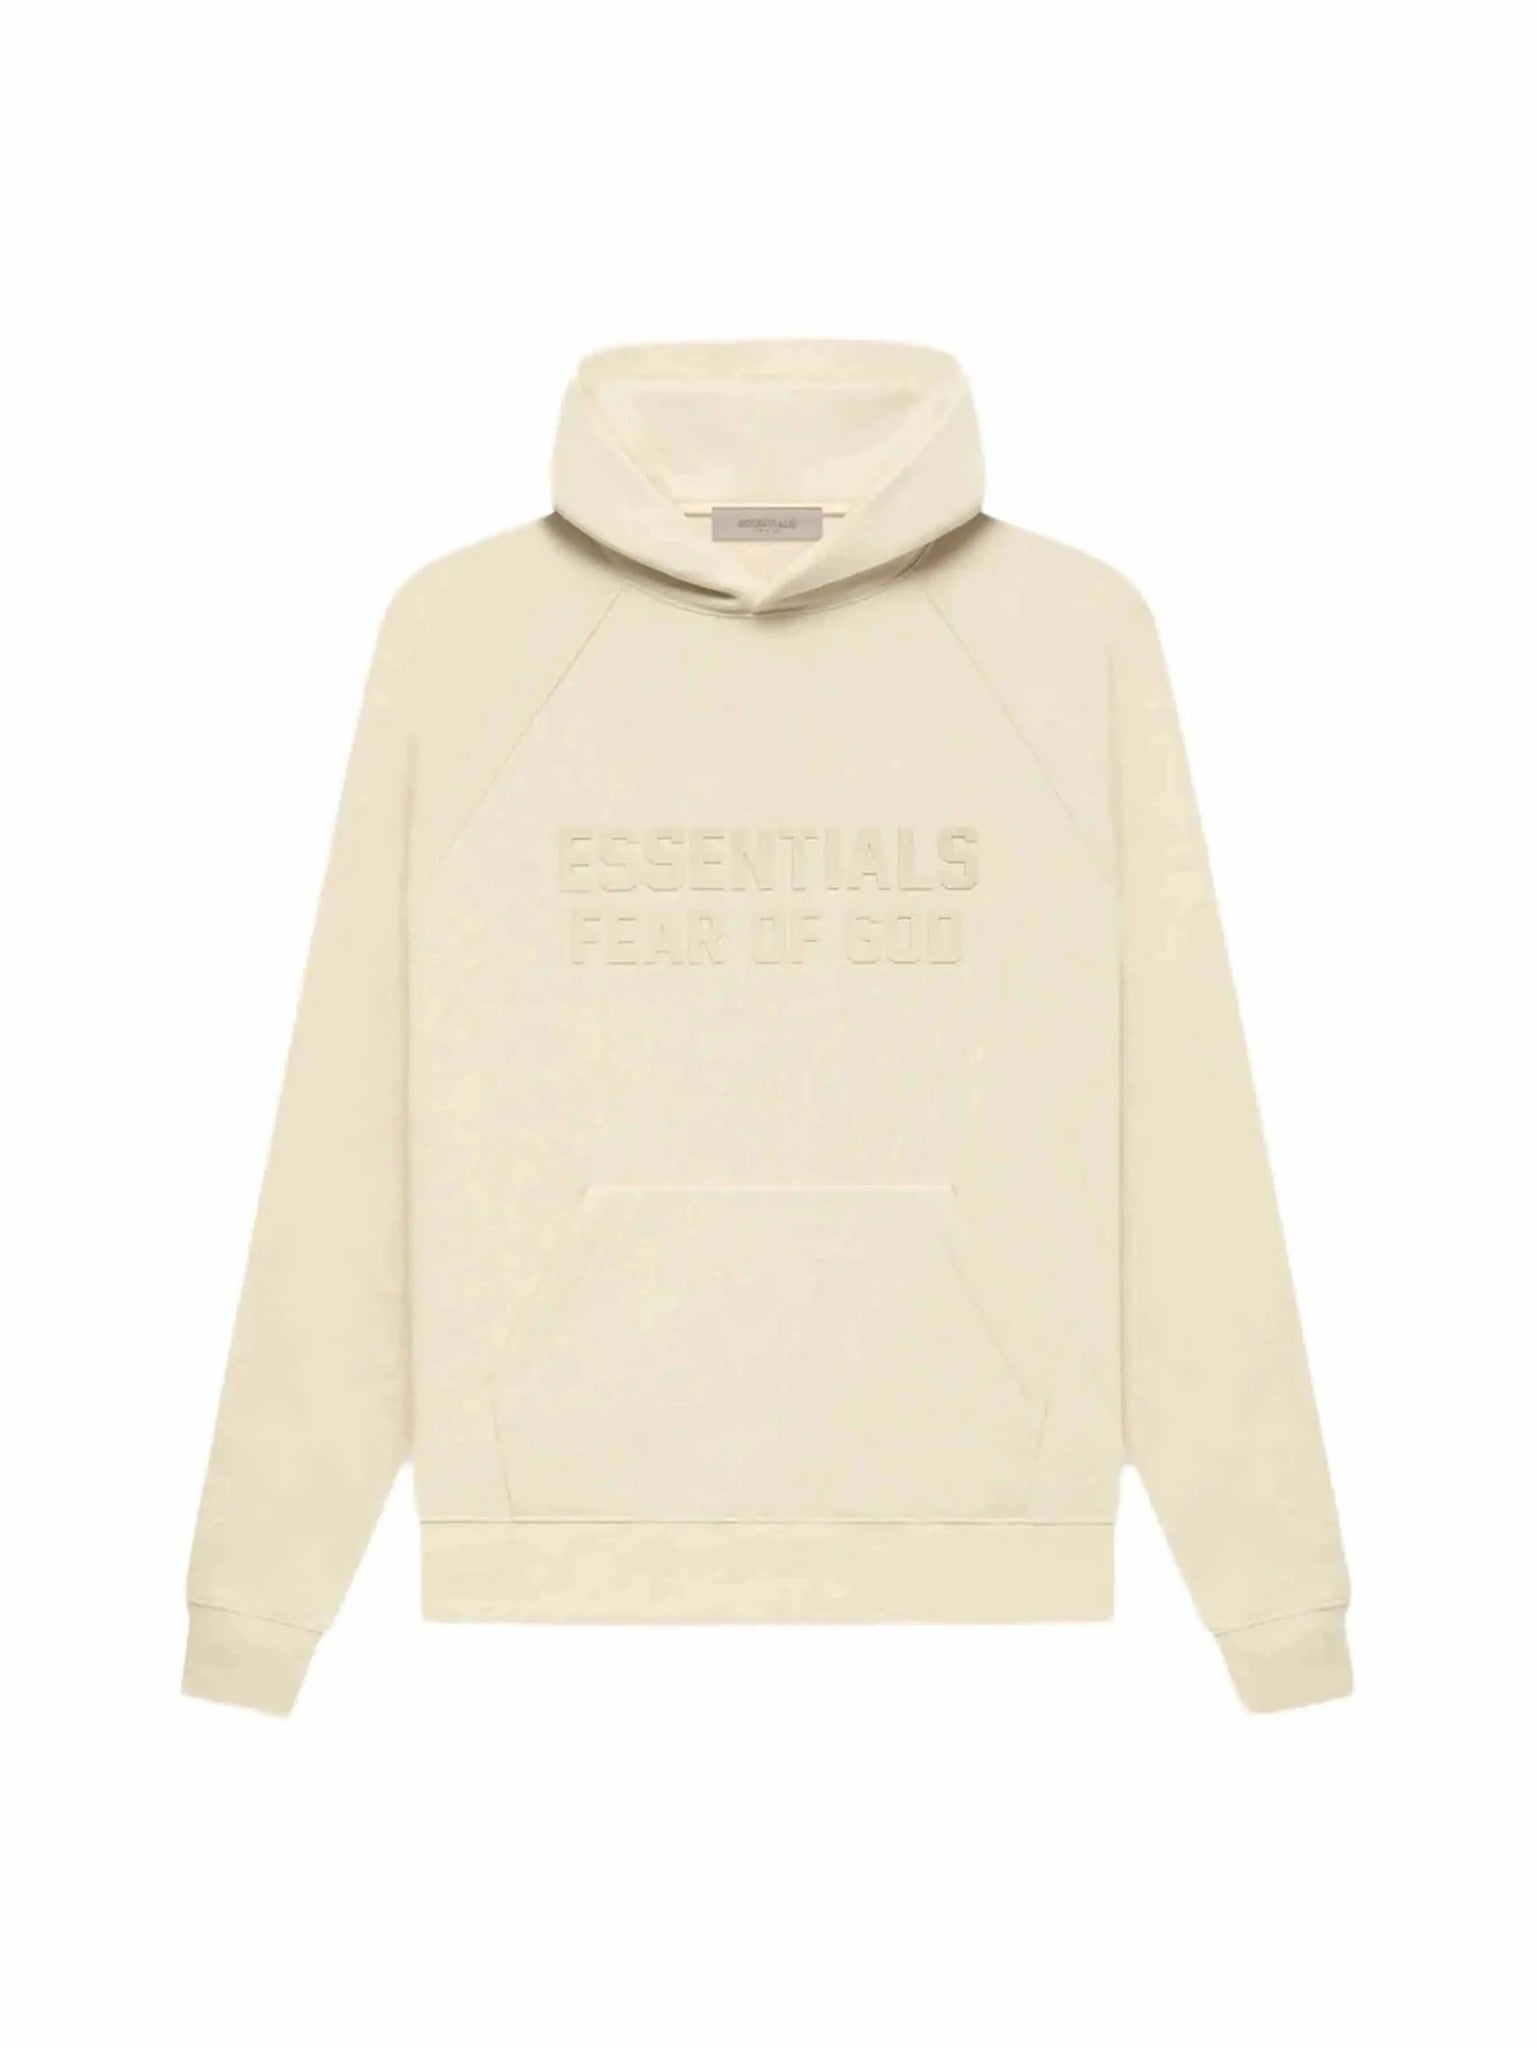 Fear of God Essentials Hoodie Egg Shell Prior